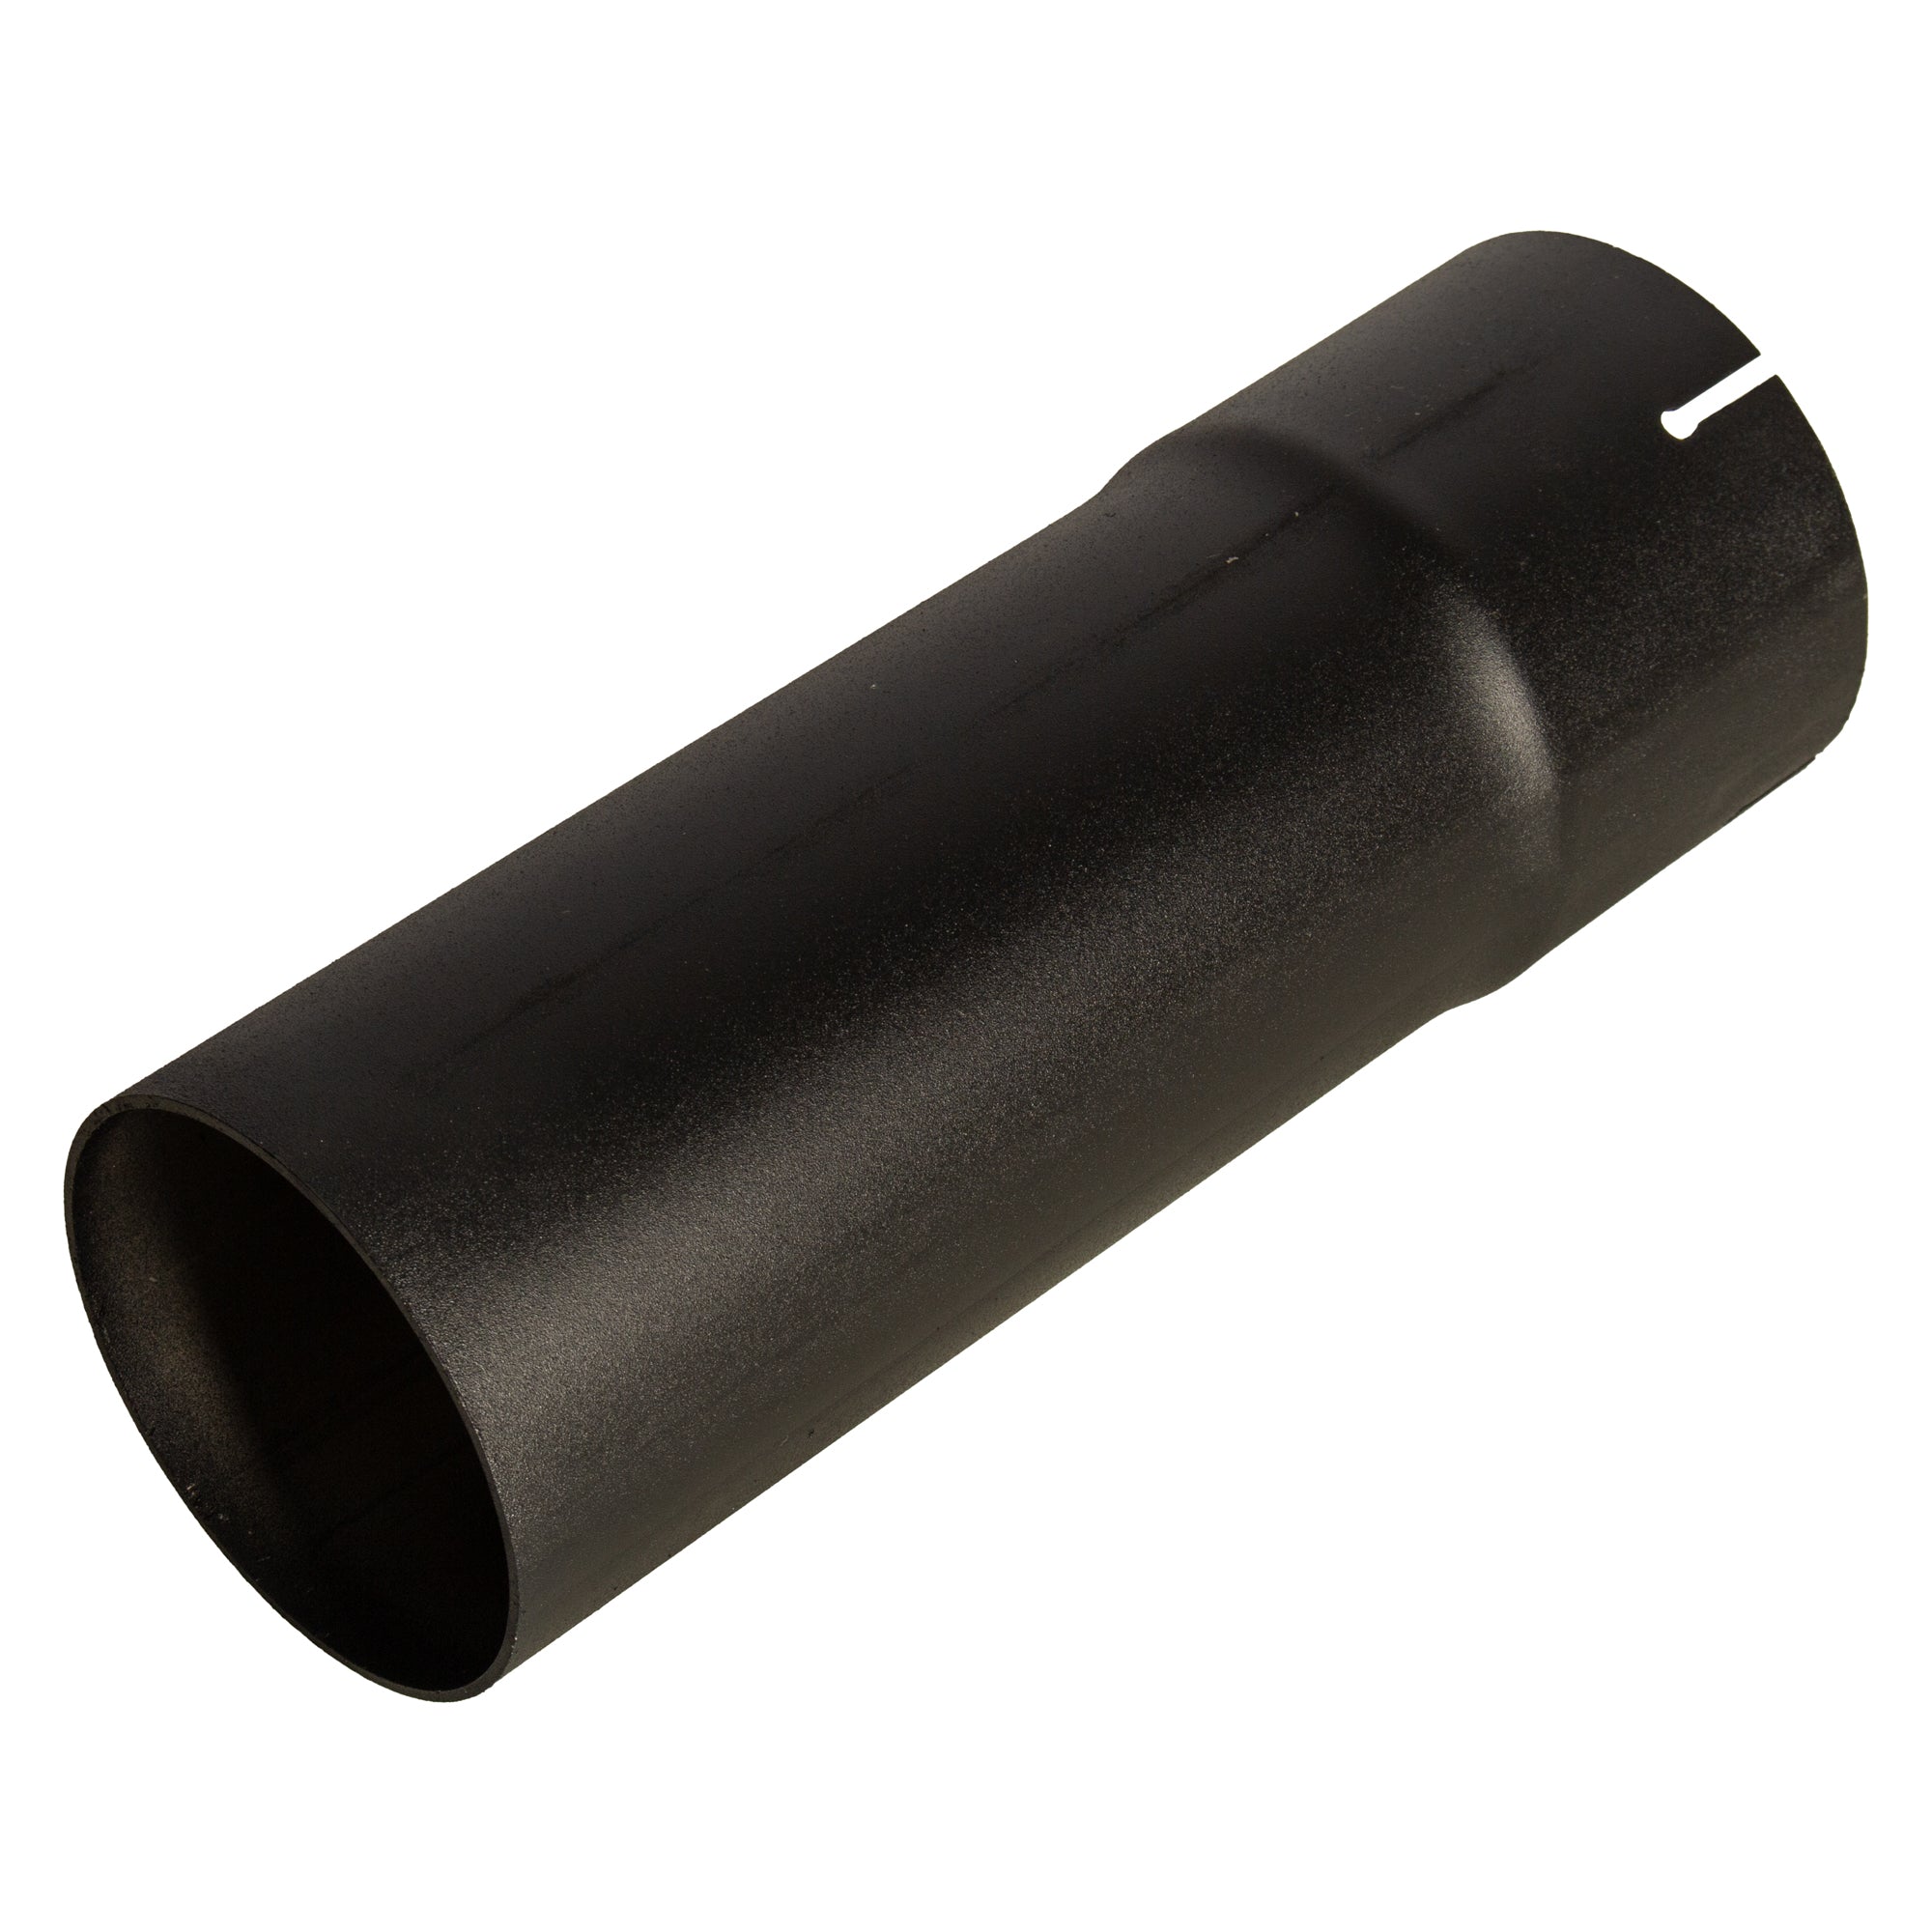 Exhaust Stack Pipe Replacement for UNIVERSAL - 4" x 12" Straight Black